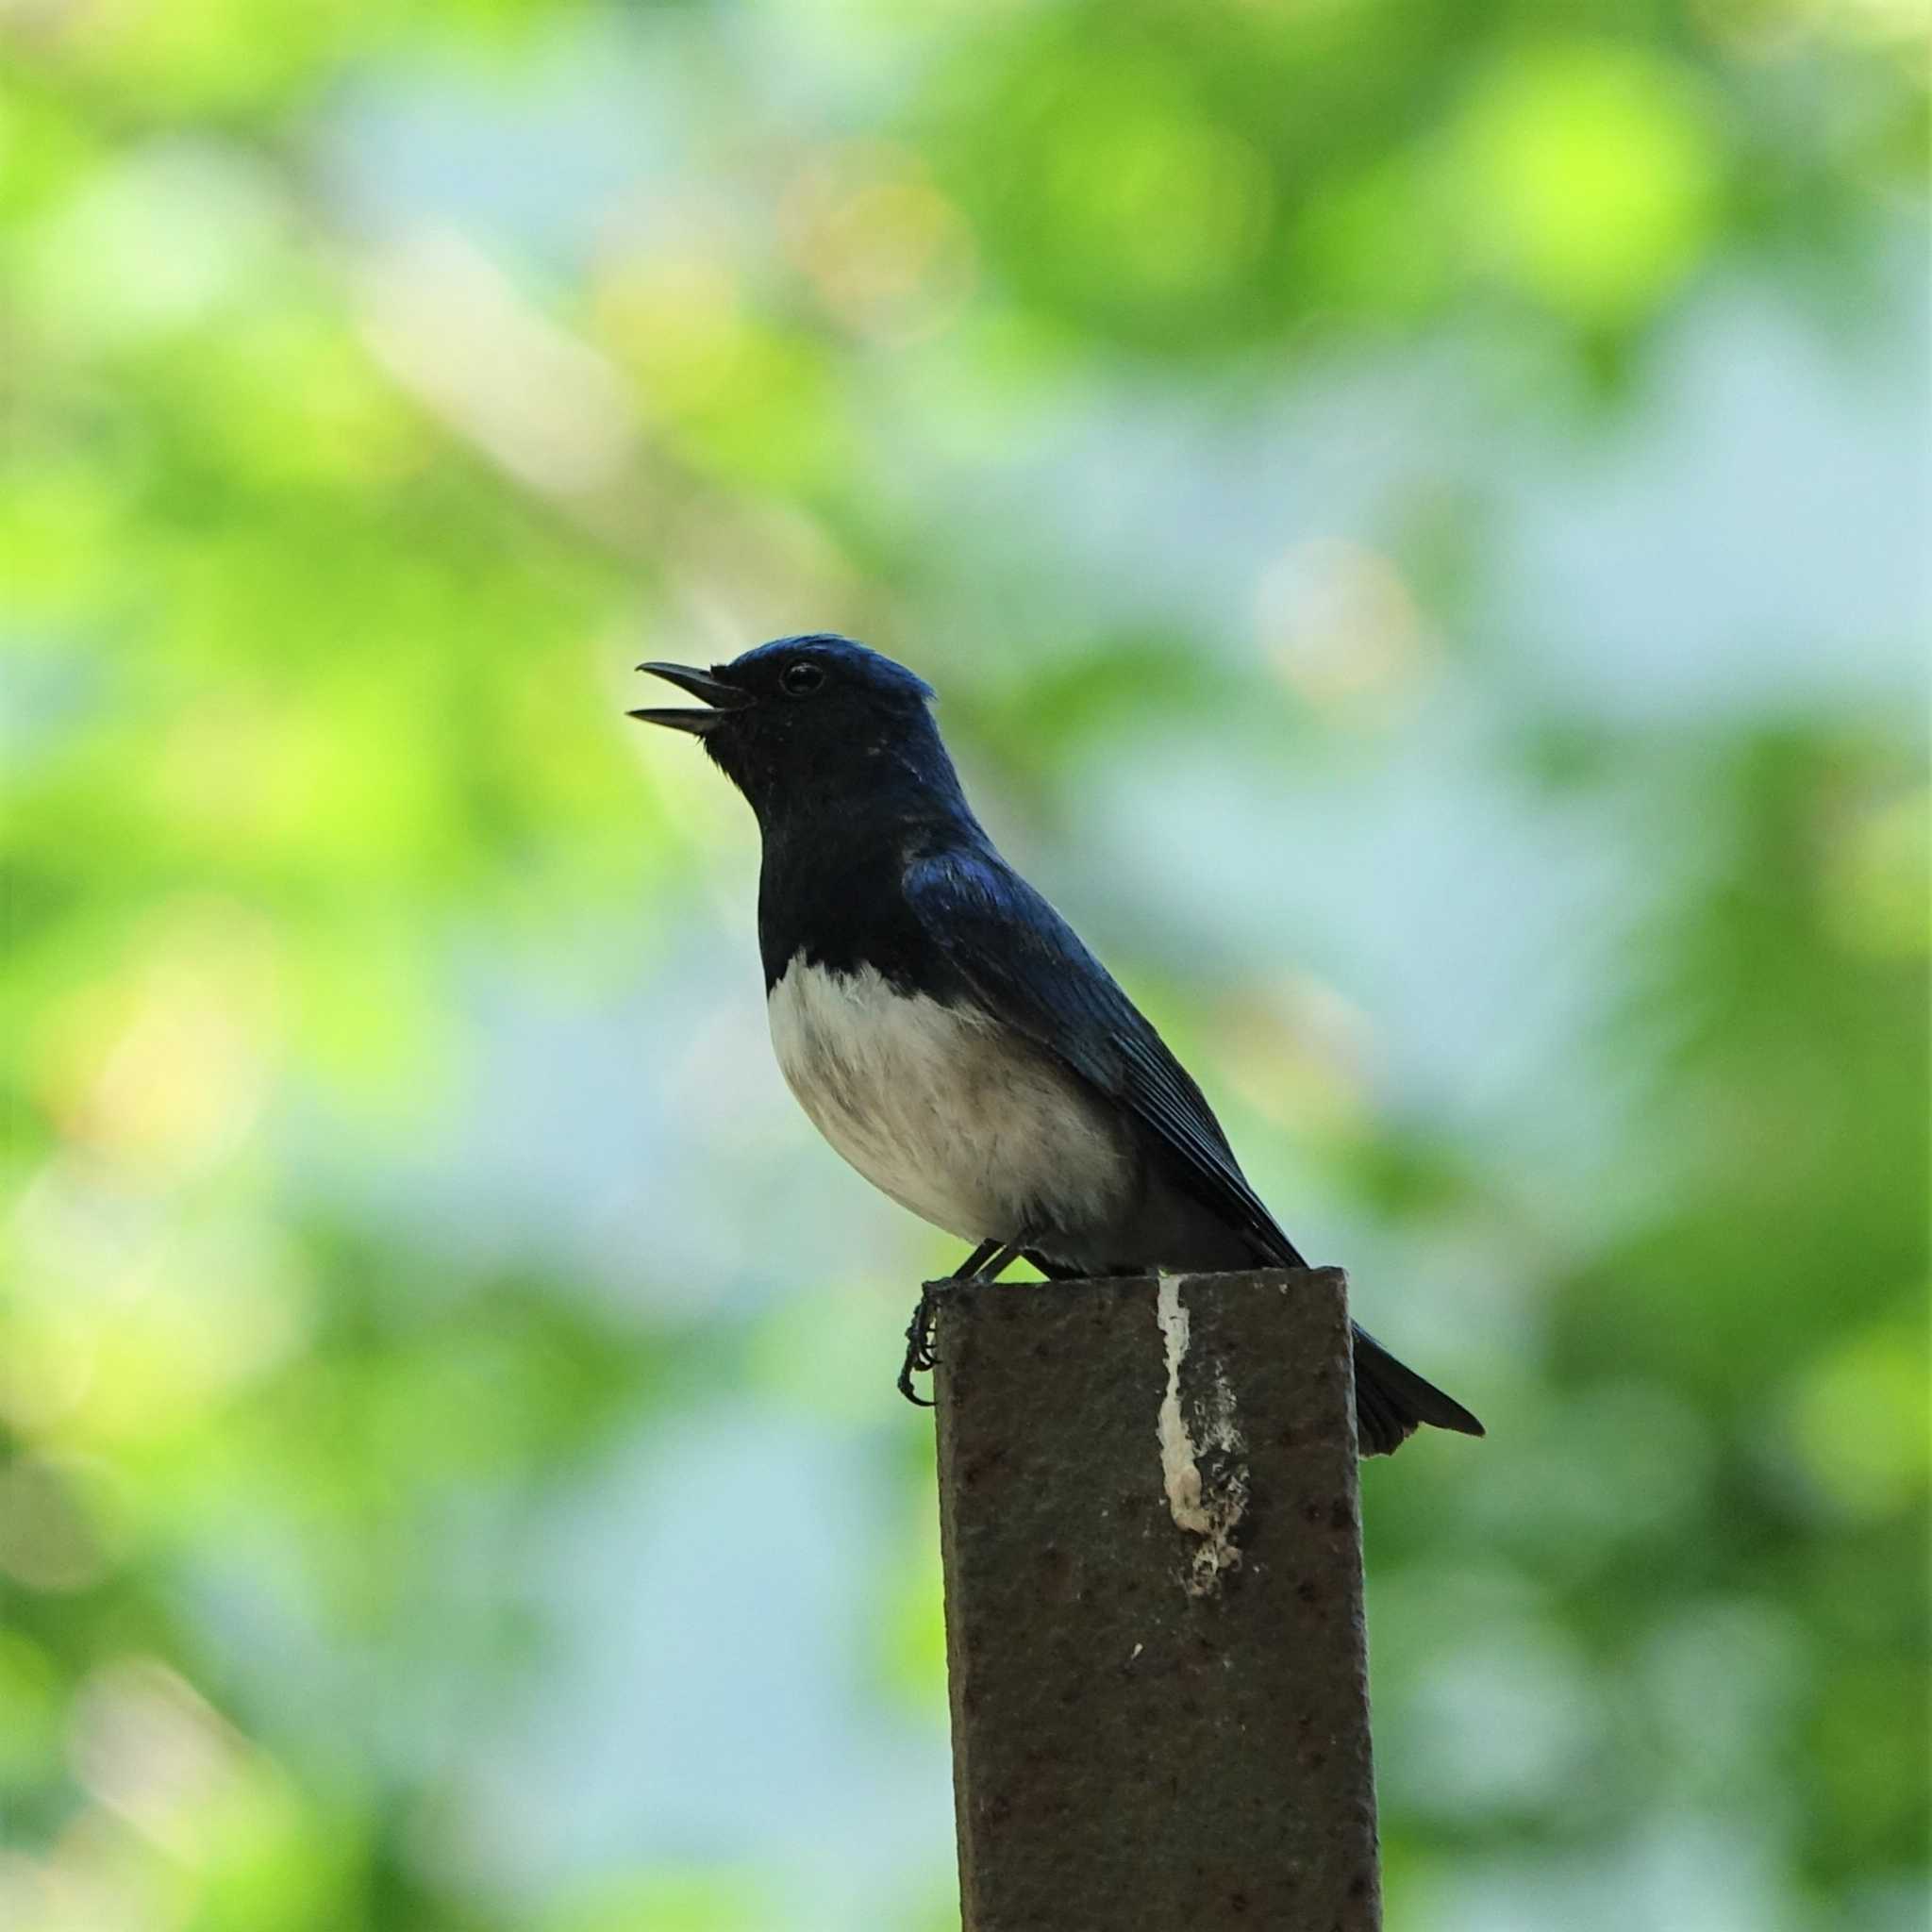 Photo of Blue-and-white Flycatcher at 奈良県宇陀市室生ダム by bmont520